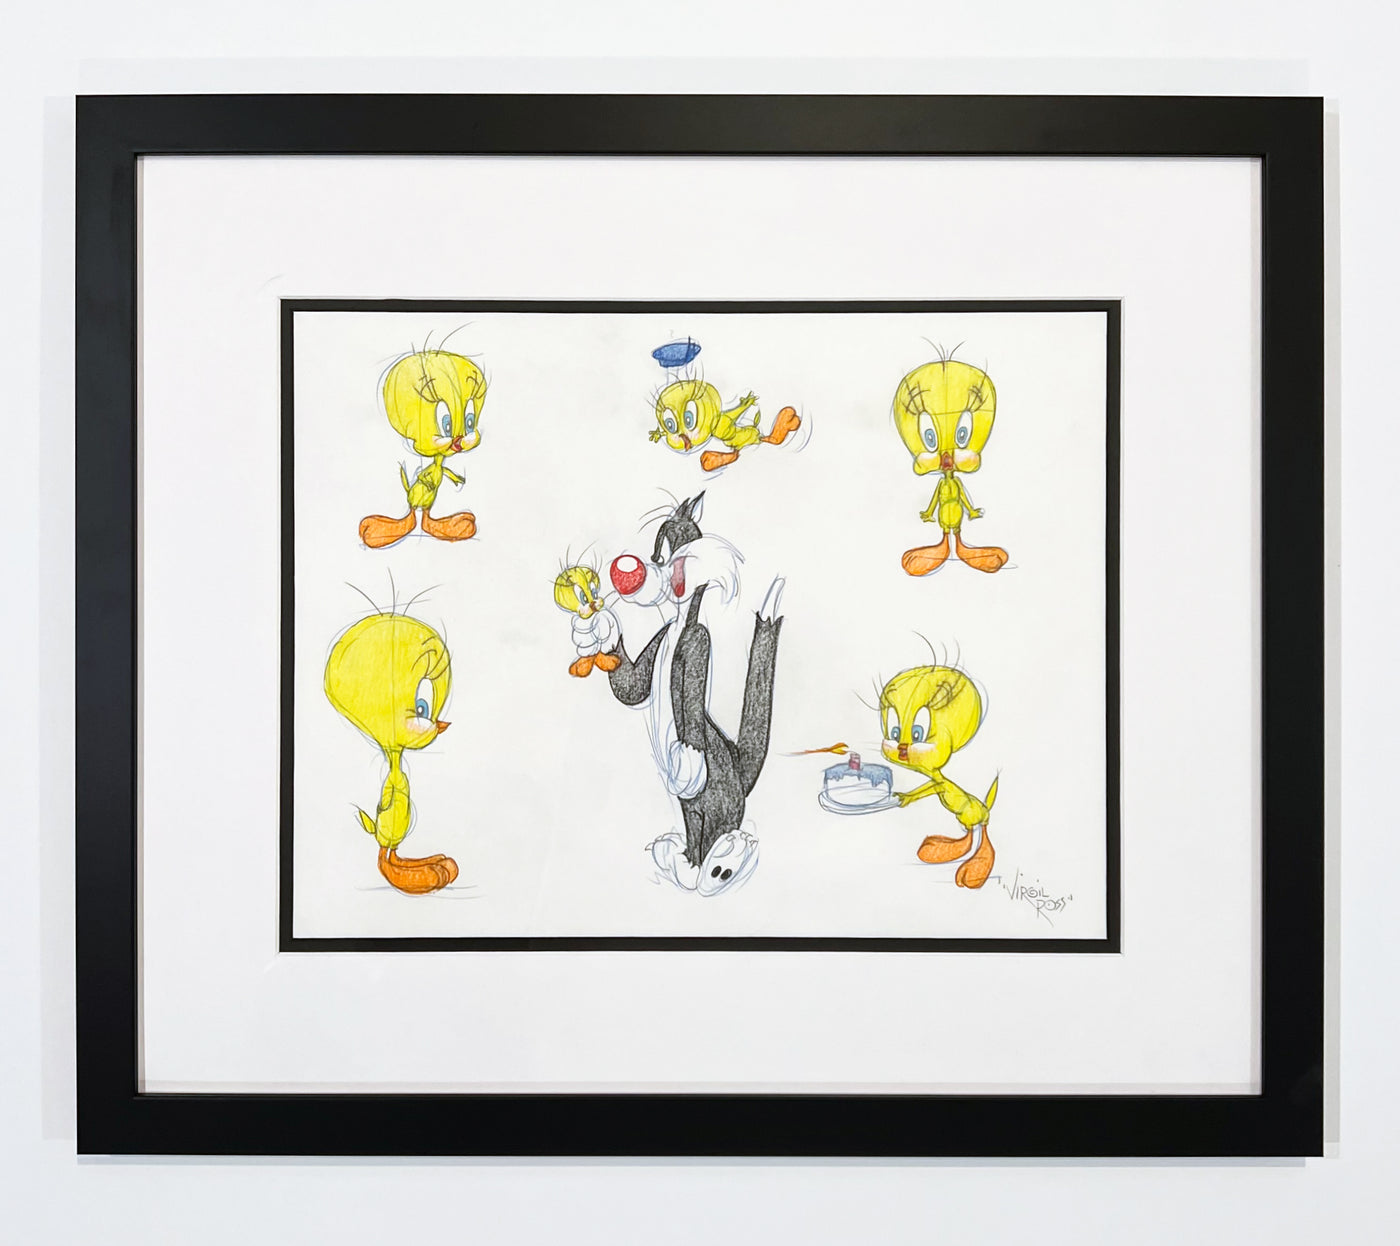 Original Warner Brothers Virgil Ross Model Sheet Animation Drawing featuring Tweety Bird and Sylvester